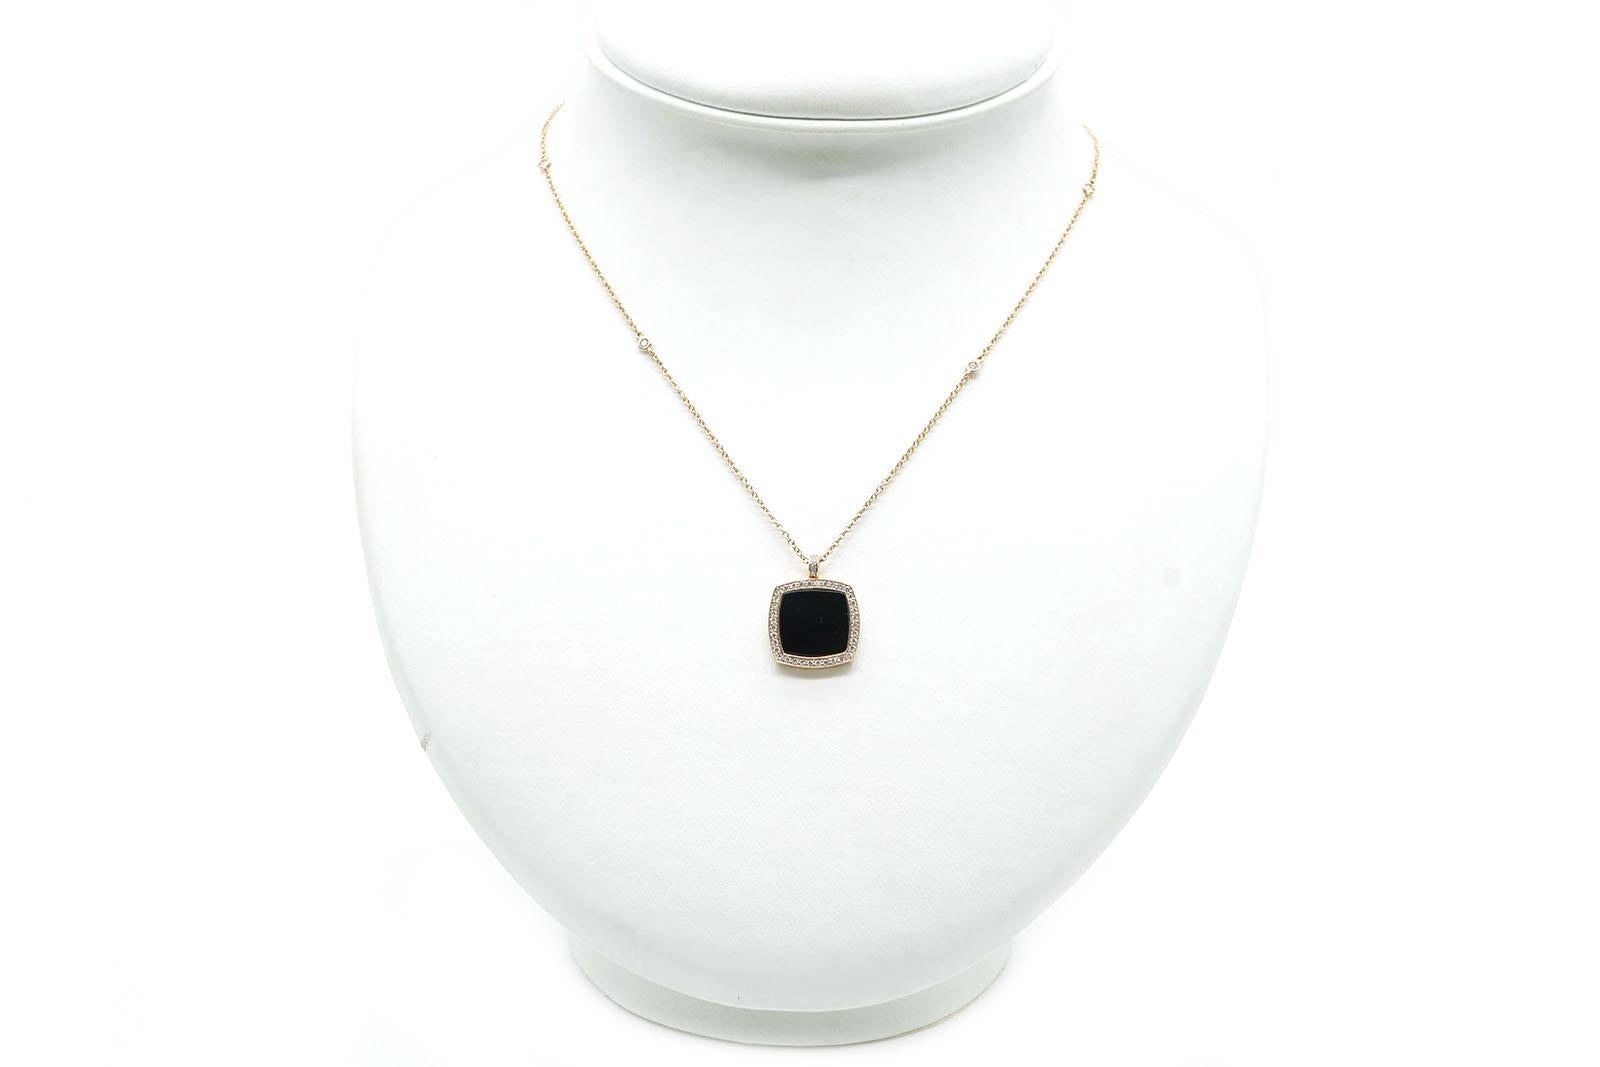 A very stylish and elegant necklace.
18 Kt pink gold necklace with Onyx pendant ( cm 1,50x1,50 ).
The chain has a length of cm 42,00 ( 16,53 in ) and four Diamonds go through it .
The pendant has a Diamond frame weighing in total ct 0,33.
The chain